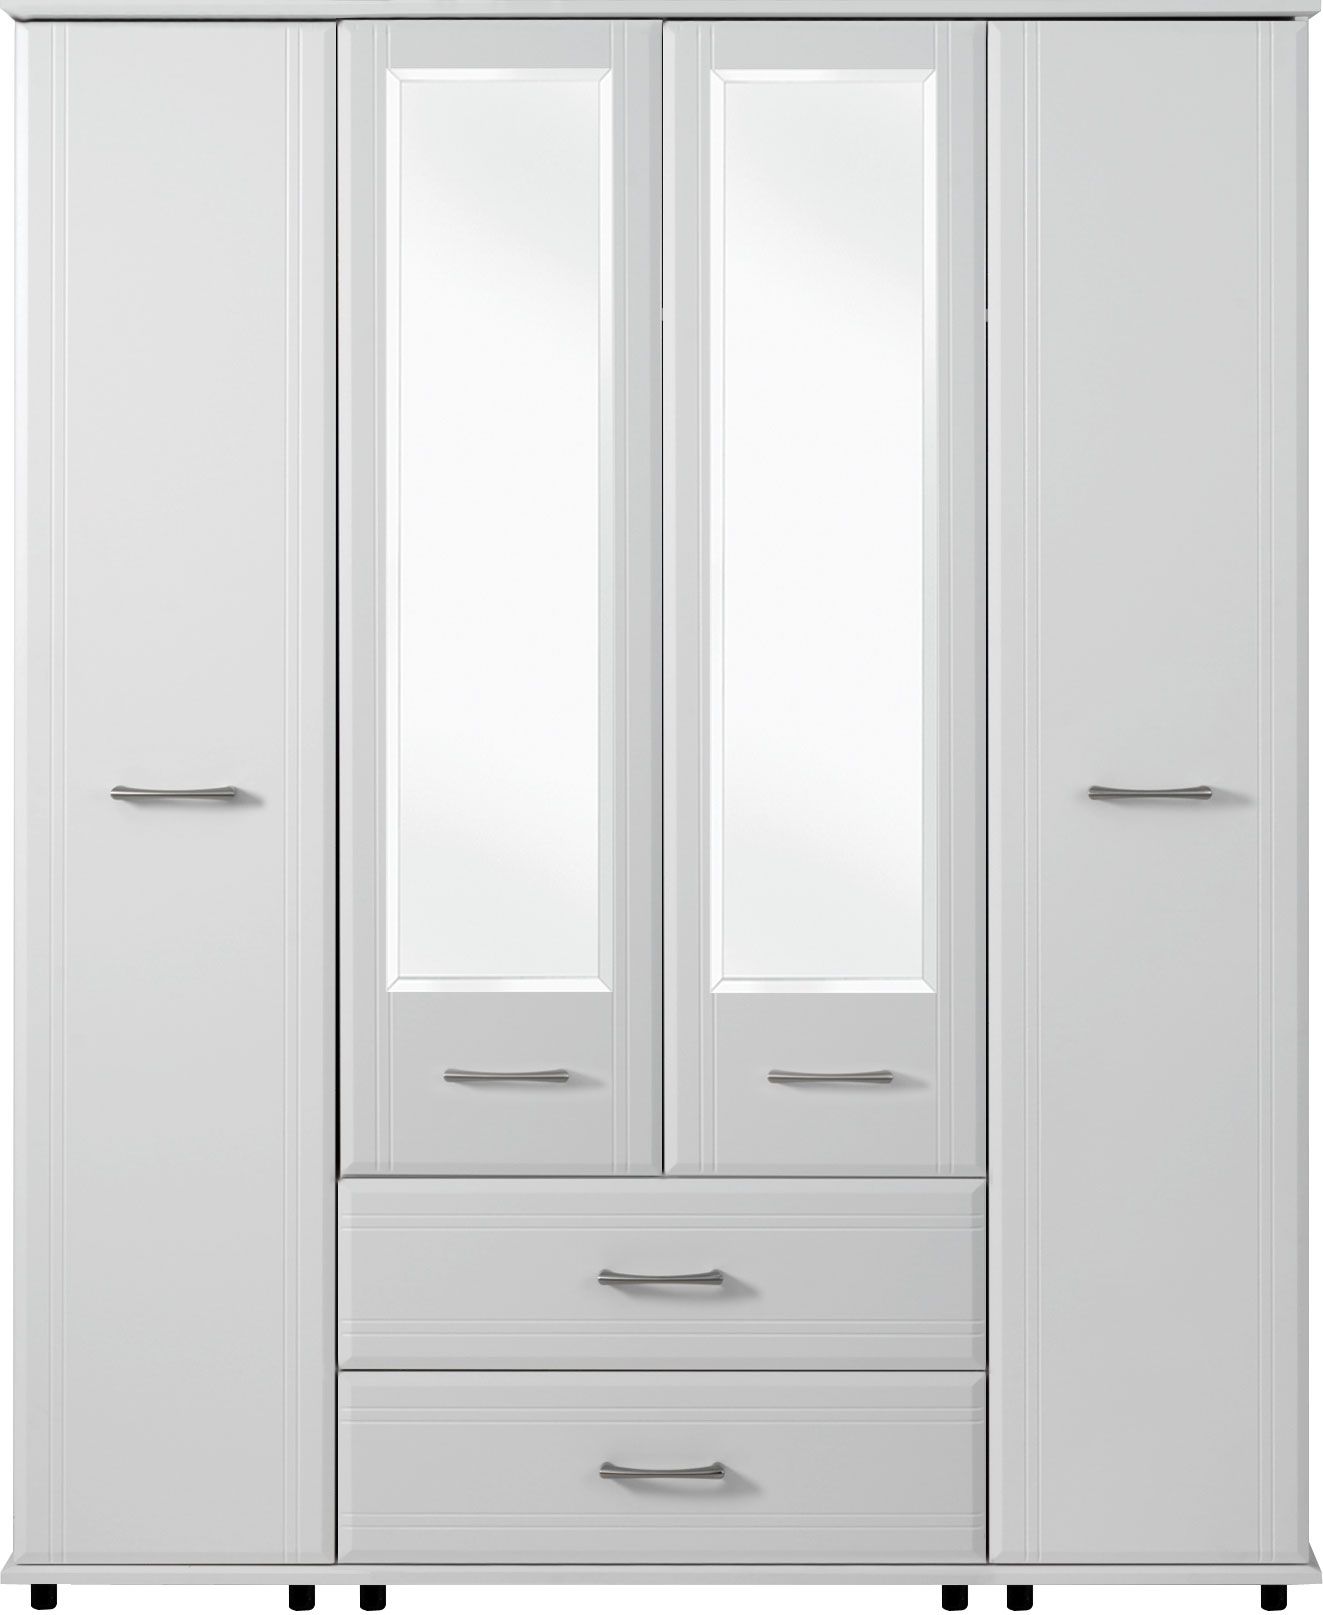 Dorchester 4 Door Wardrobe 2 Mirrors 2 Drawers – Crendon Beds & Furniture With 4 Door Wardrobes With Mirror And Drawers (View 11 of 15)